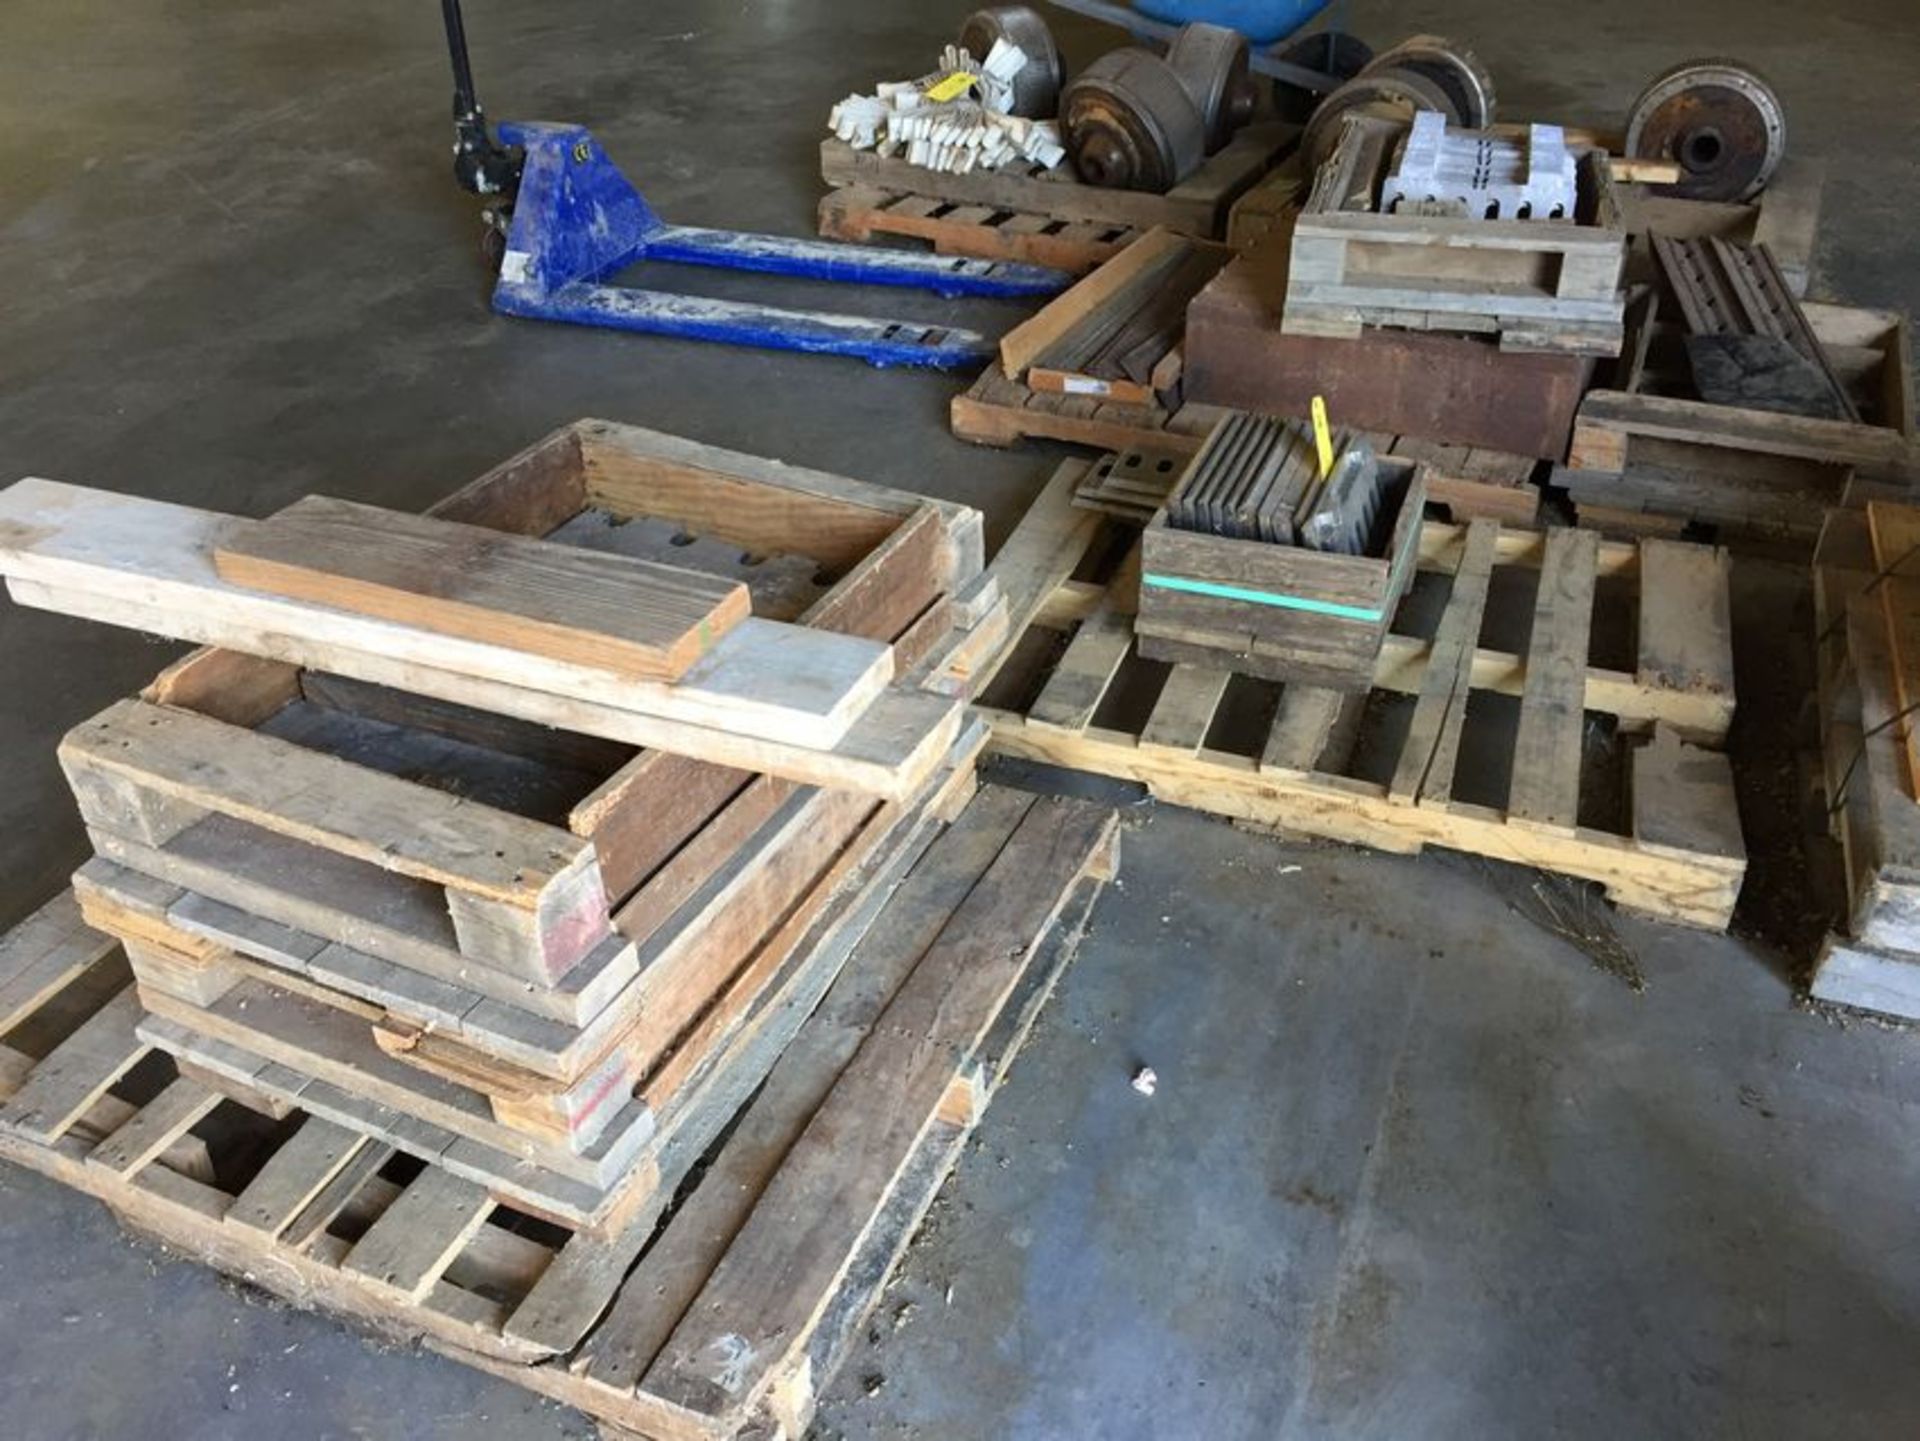 Lot of chipper blades on (3) pallets